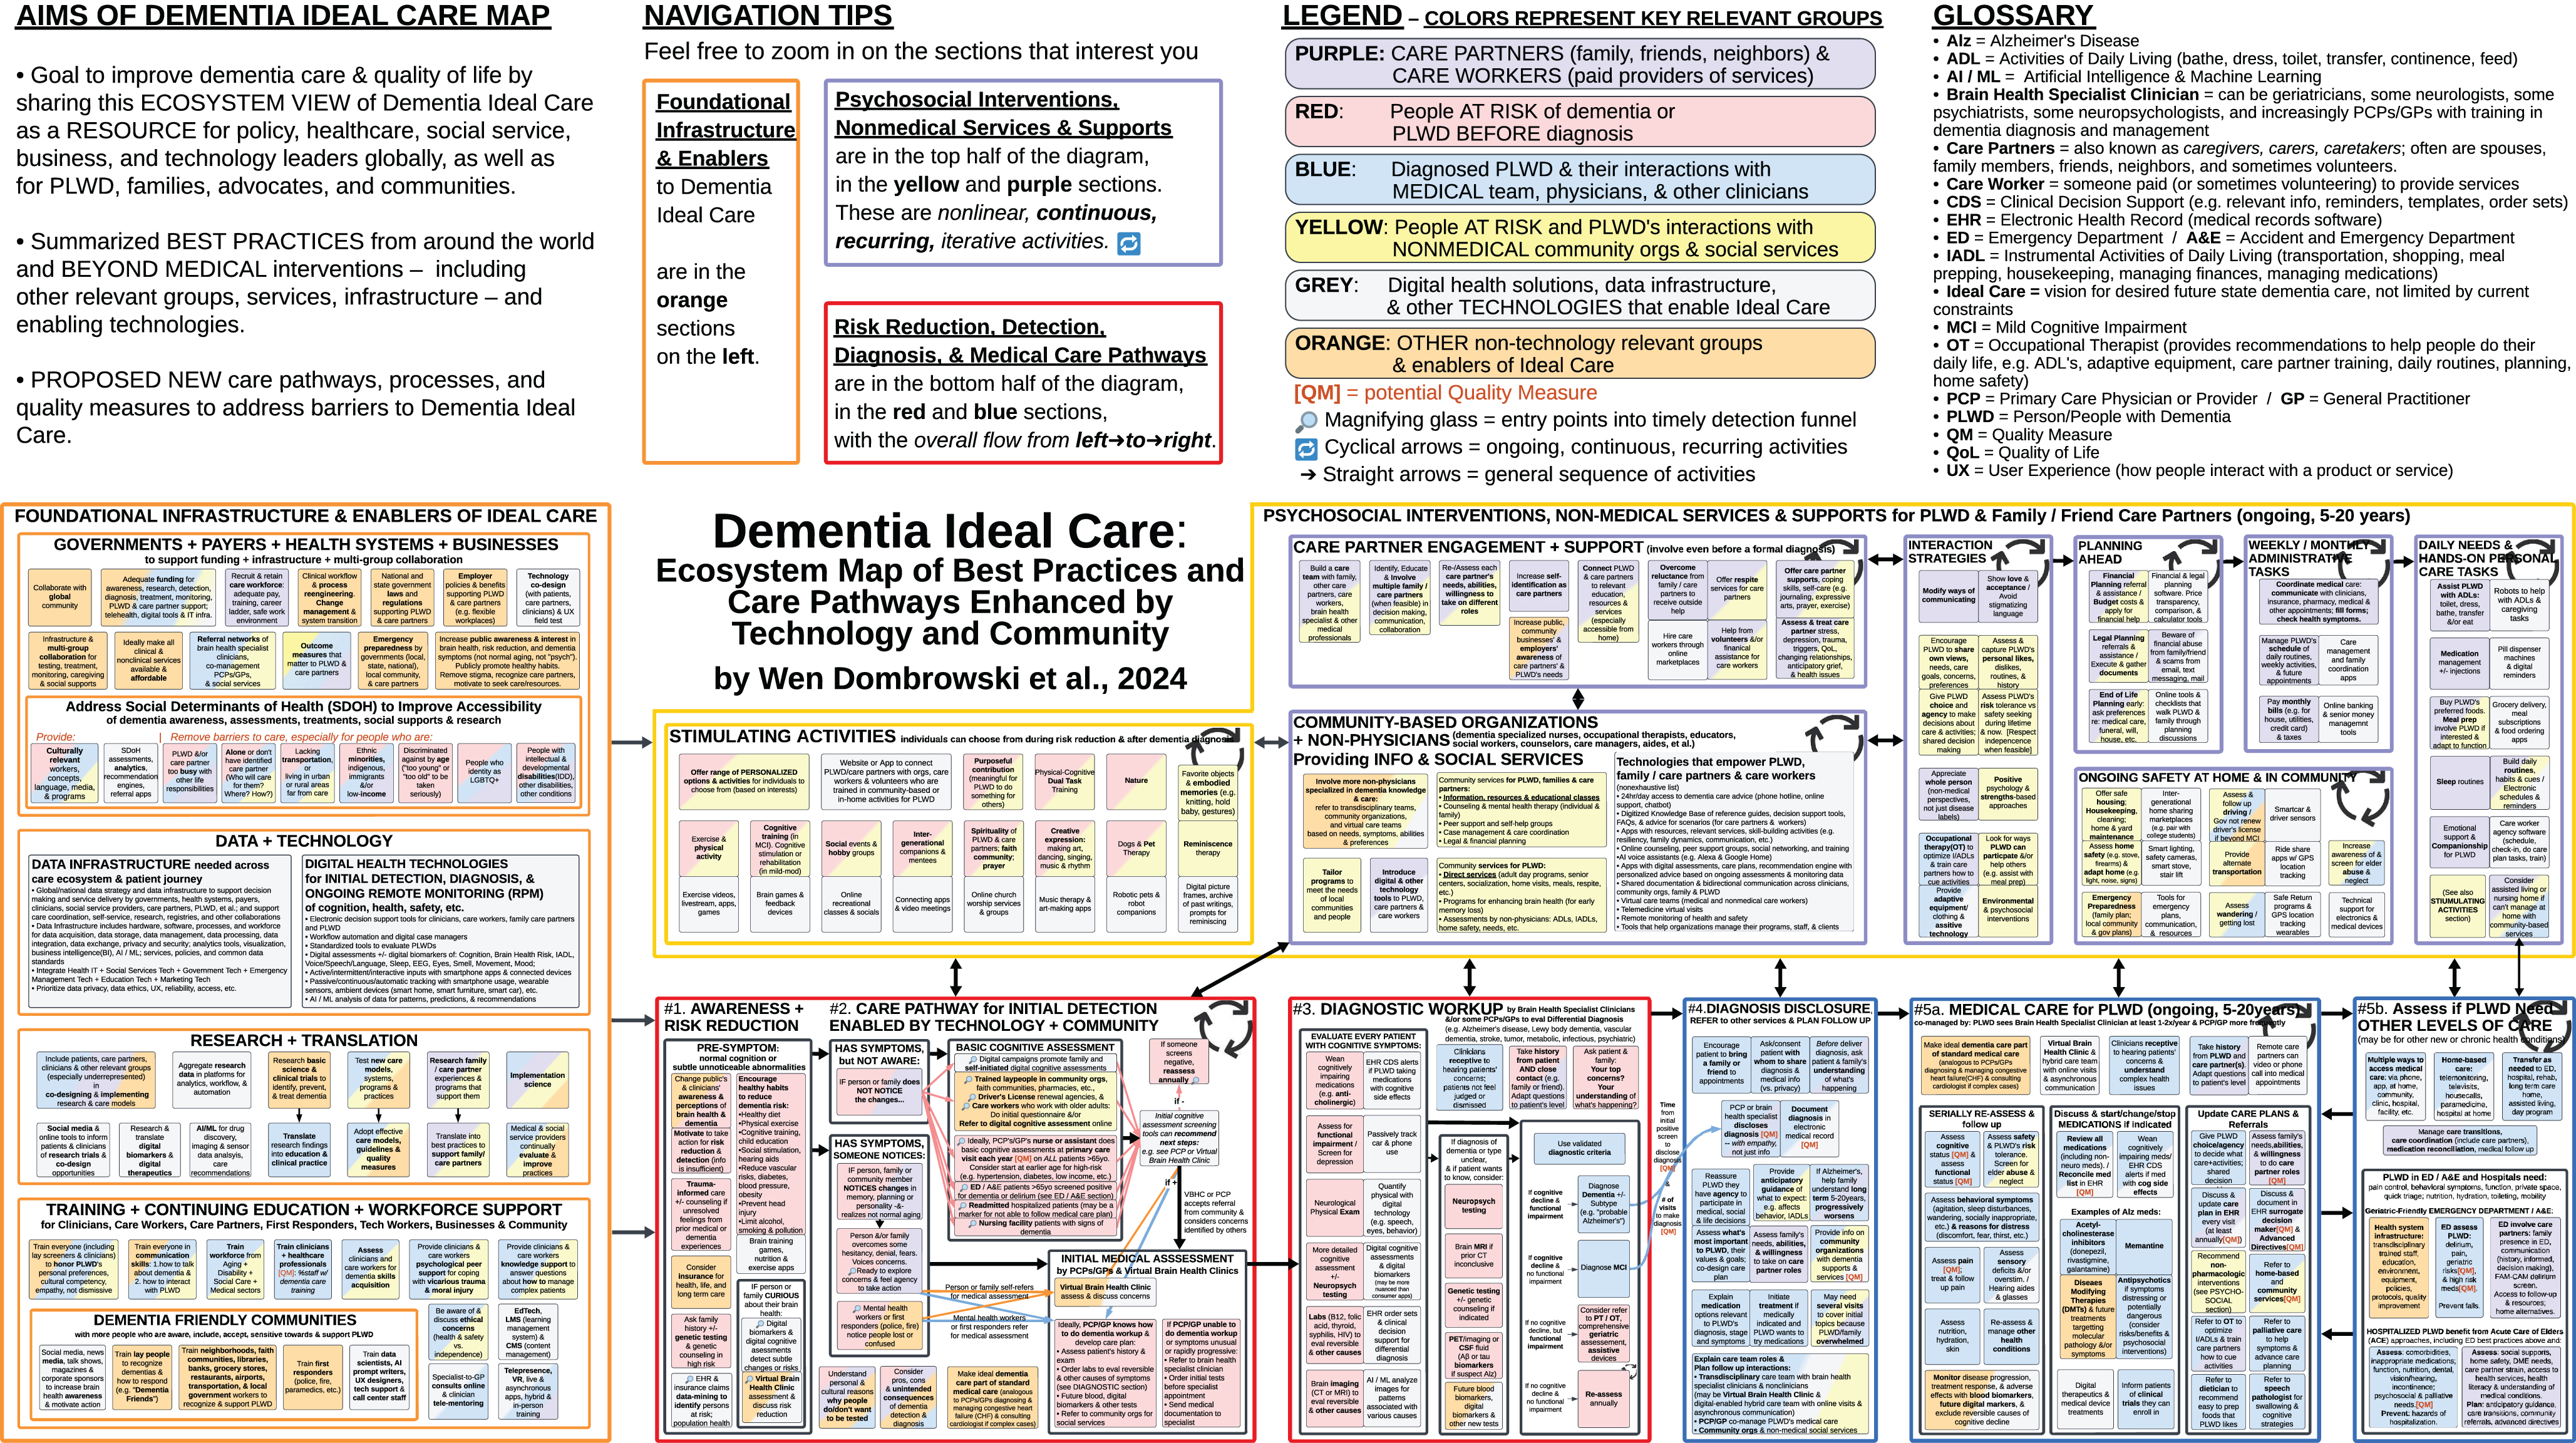 Dementia Ideal Care Map: Ecosystem Map of Best Practices and Care Pathways Enhanced by Technology and Community (diagram at a glance view). Click here for a full PDF of the figure.